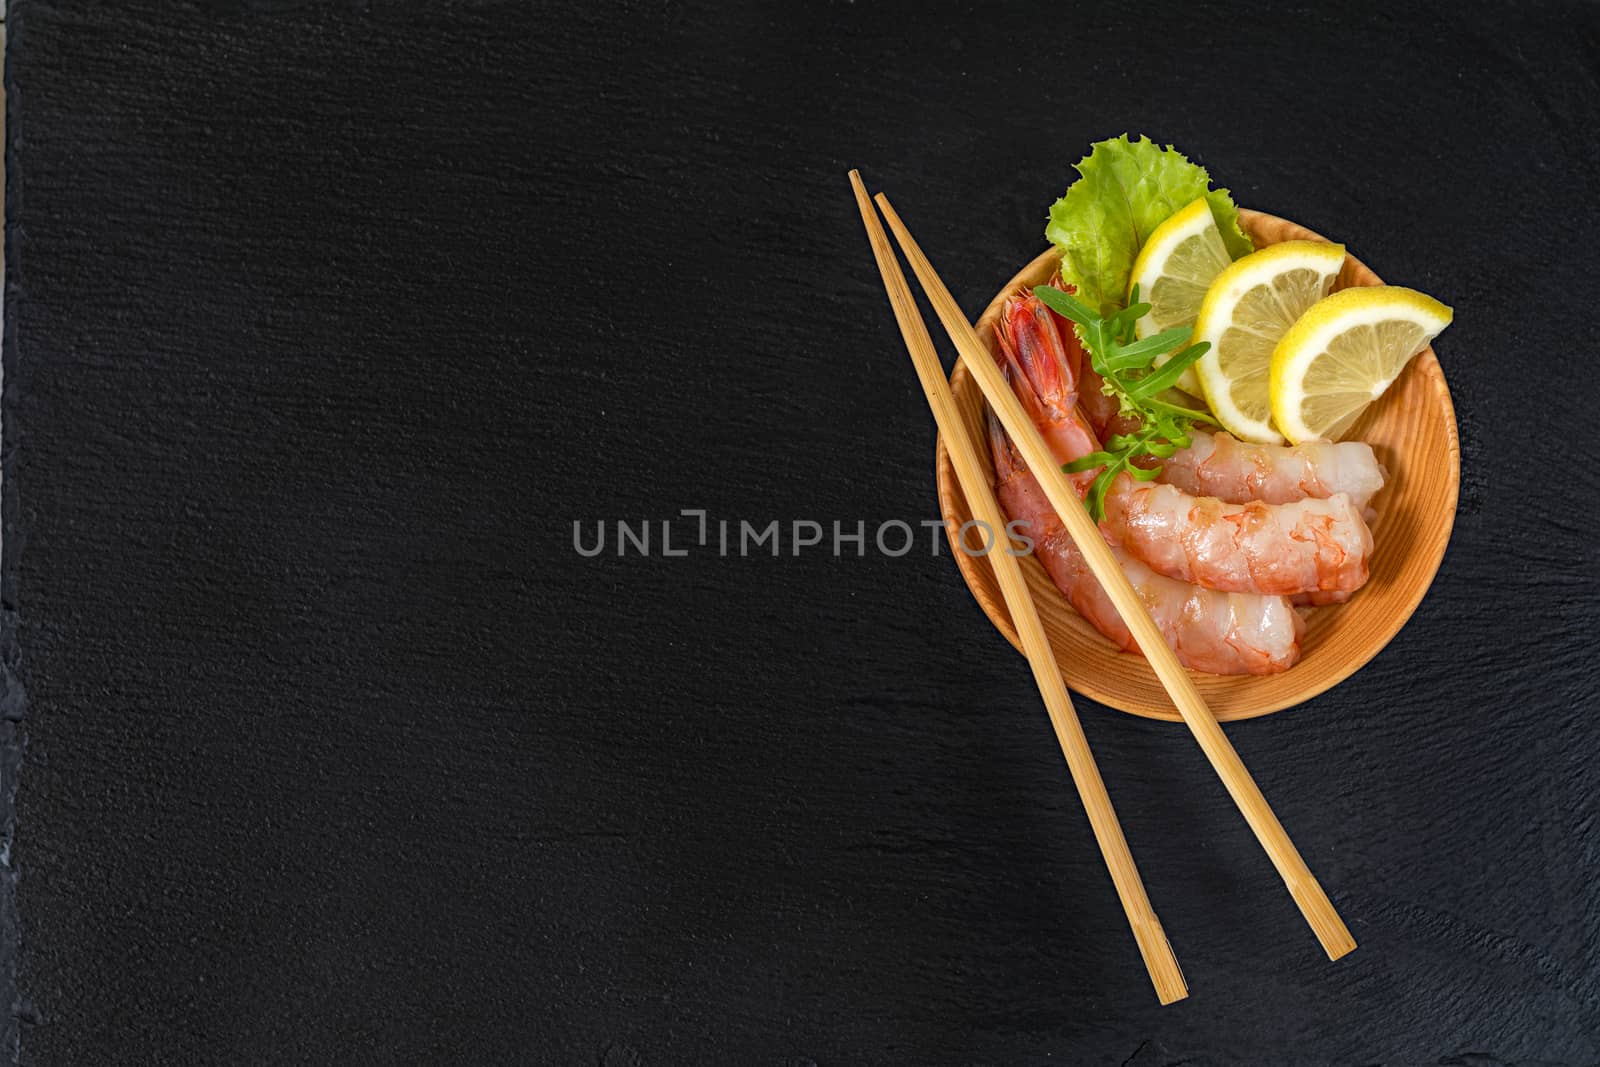 Shrimp on a wooden plate with wooden chopsticks by ArtSvitlyna